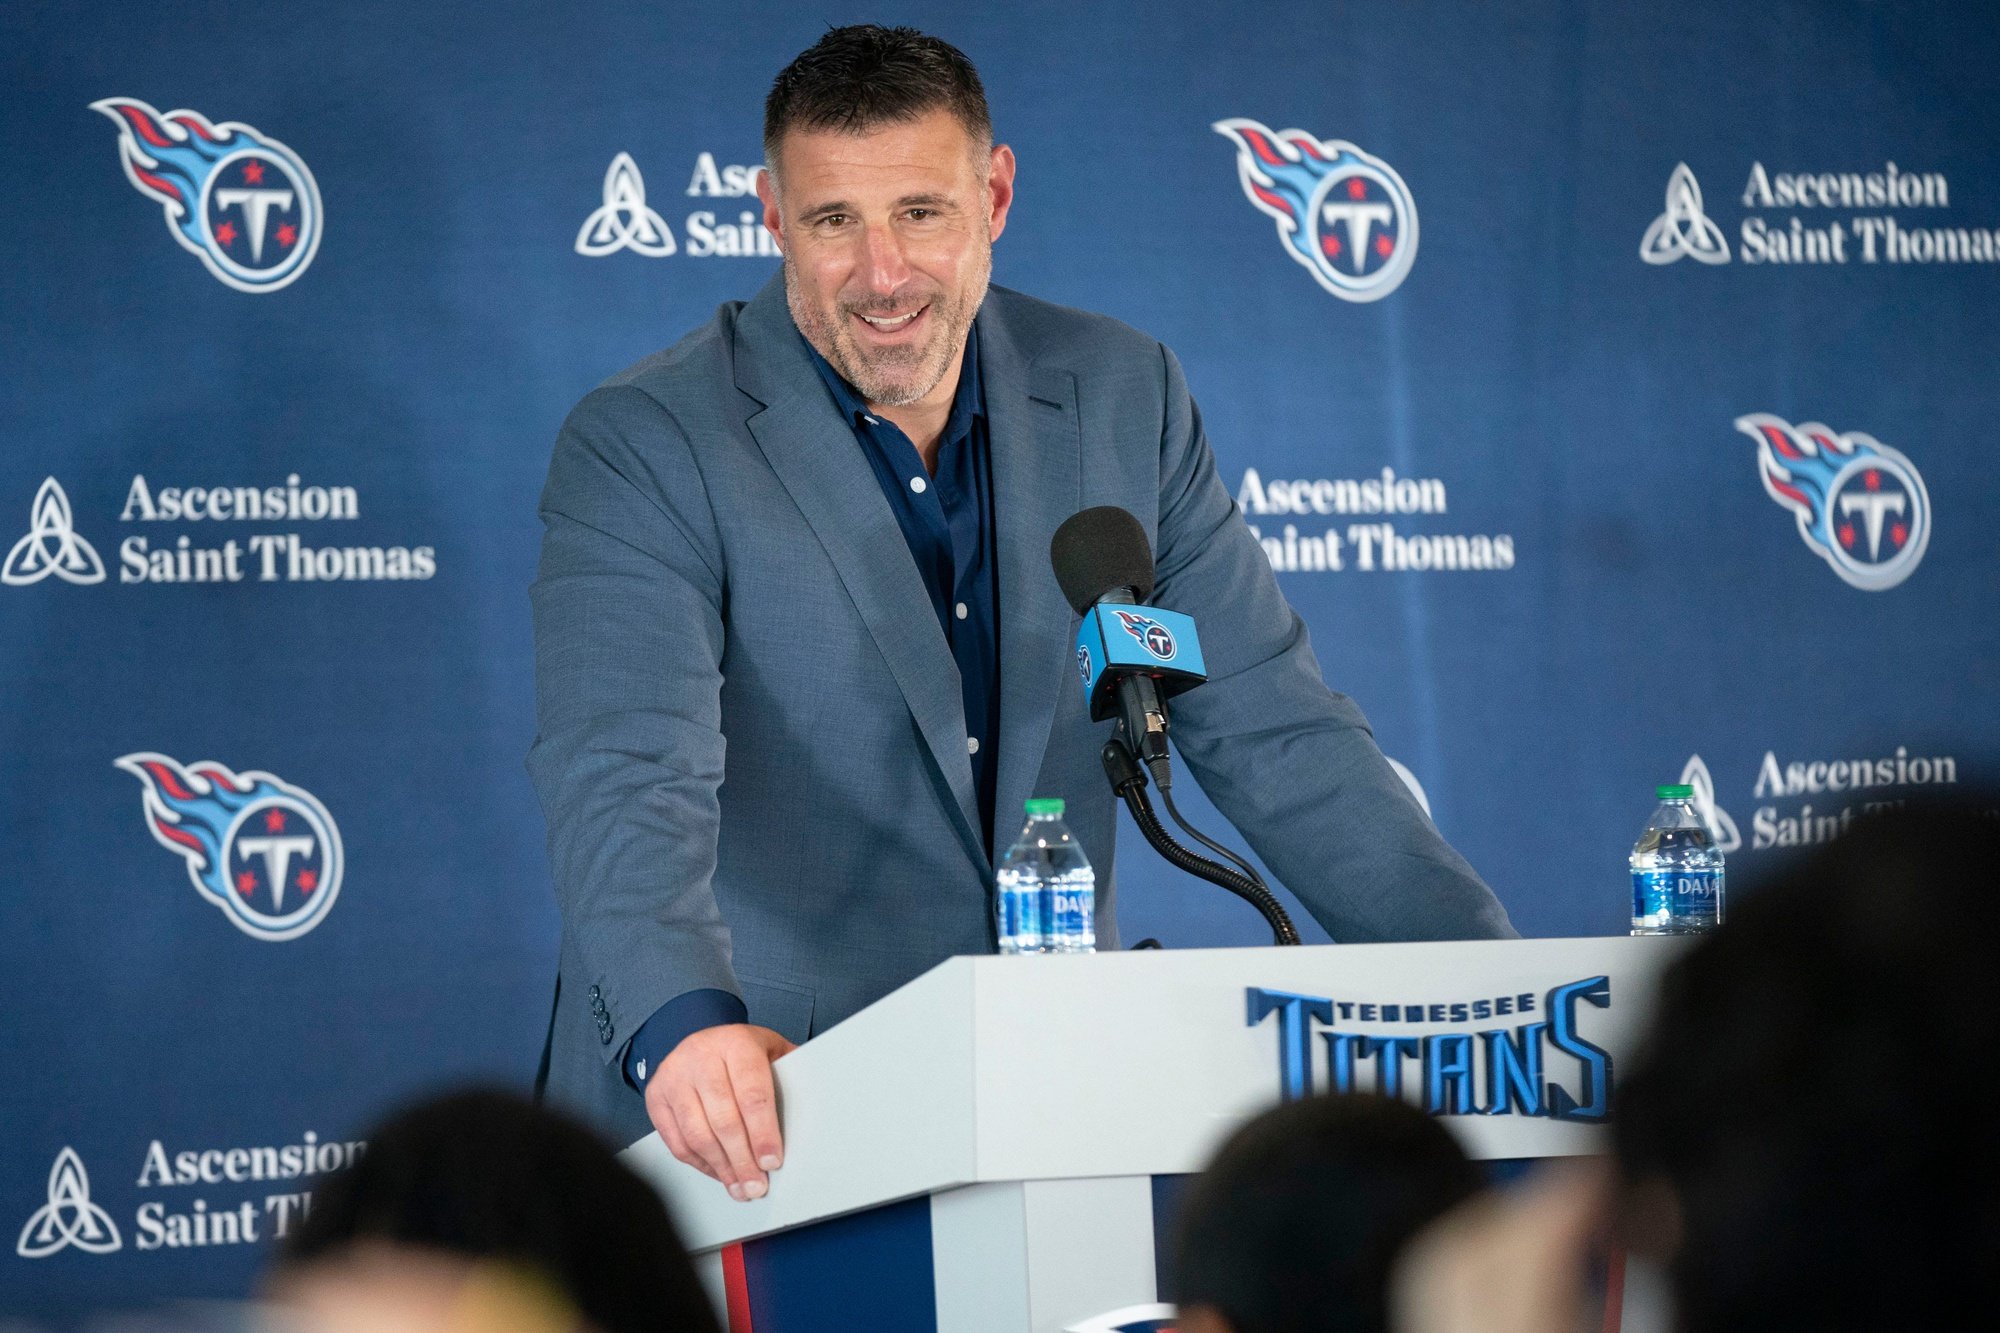 Tennessee Titans Schedule 2023 Dates, Times, TV Schedule, and More